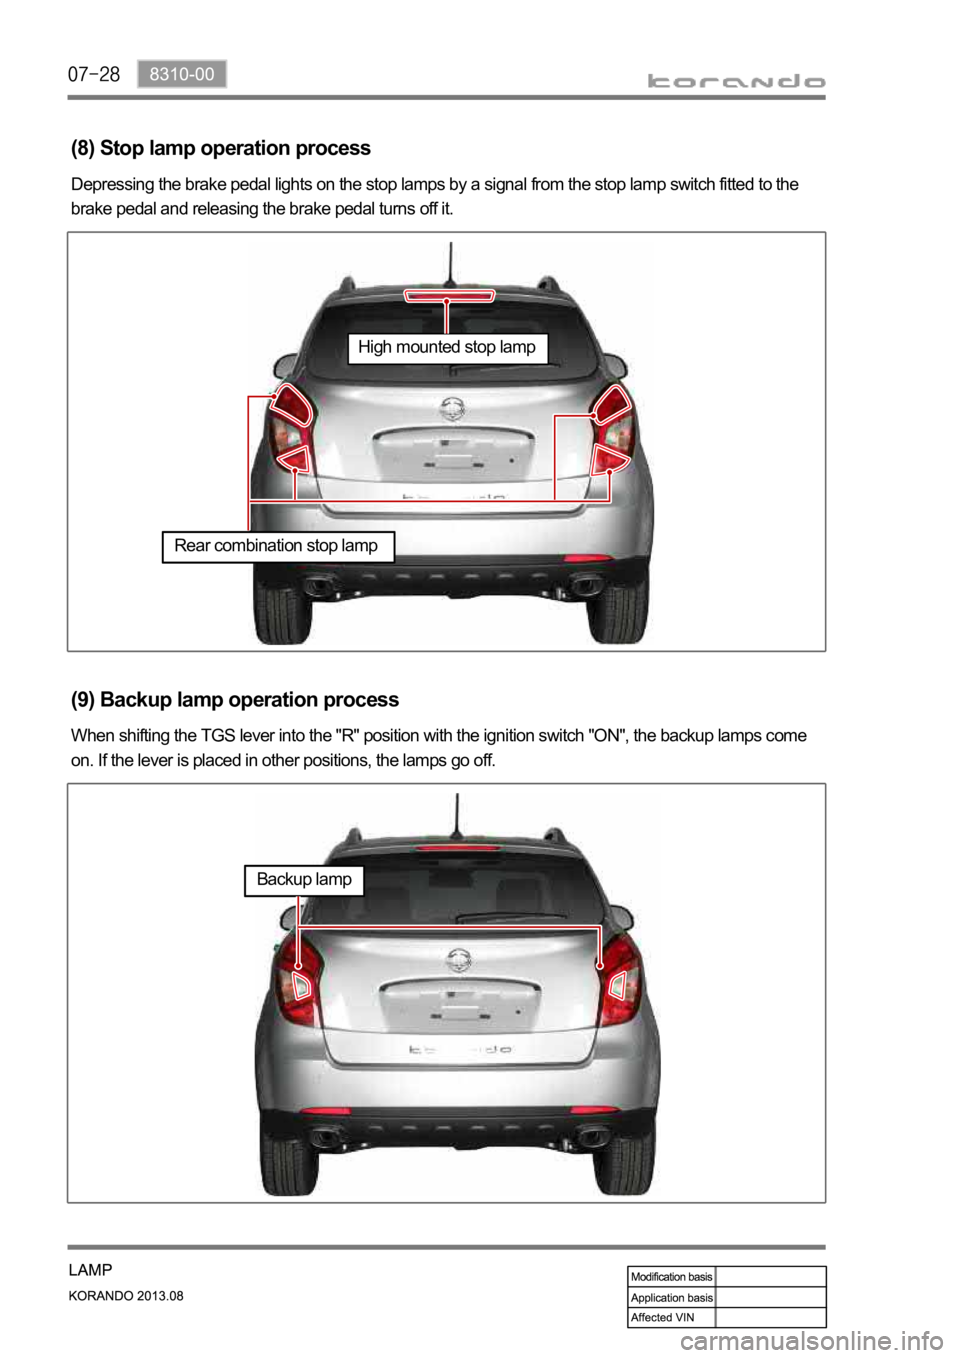 SSANGYONG KORANDO 2013  Service Manual (8) Stop lamp operation process
Depressing the brake pedal lights on the stop lamps by a signal from the stop lamp switch fitted to the 
brake pedal and releasing the brake pedal turns off it.
(9) Bac